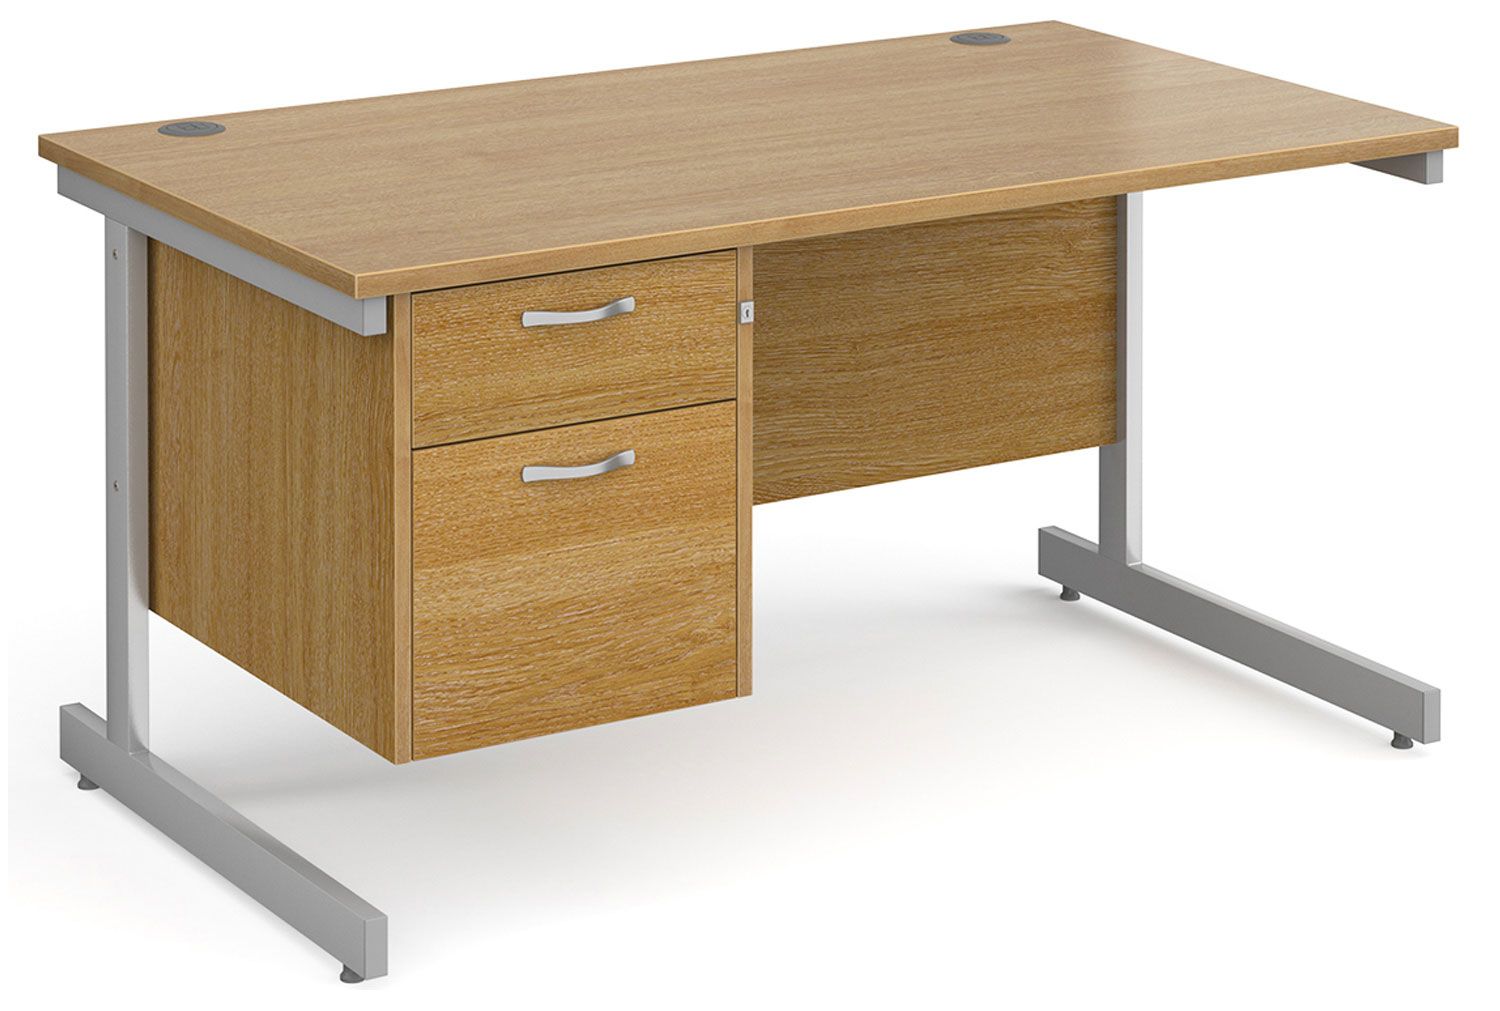 Thrifty Next-Day Rectangular Office Desk 2 Drawers Oak, 140wx80dx73h (cm), Express Delivery